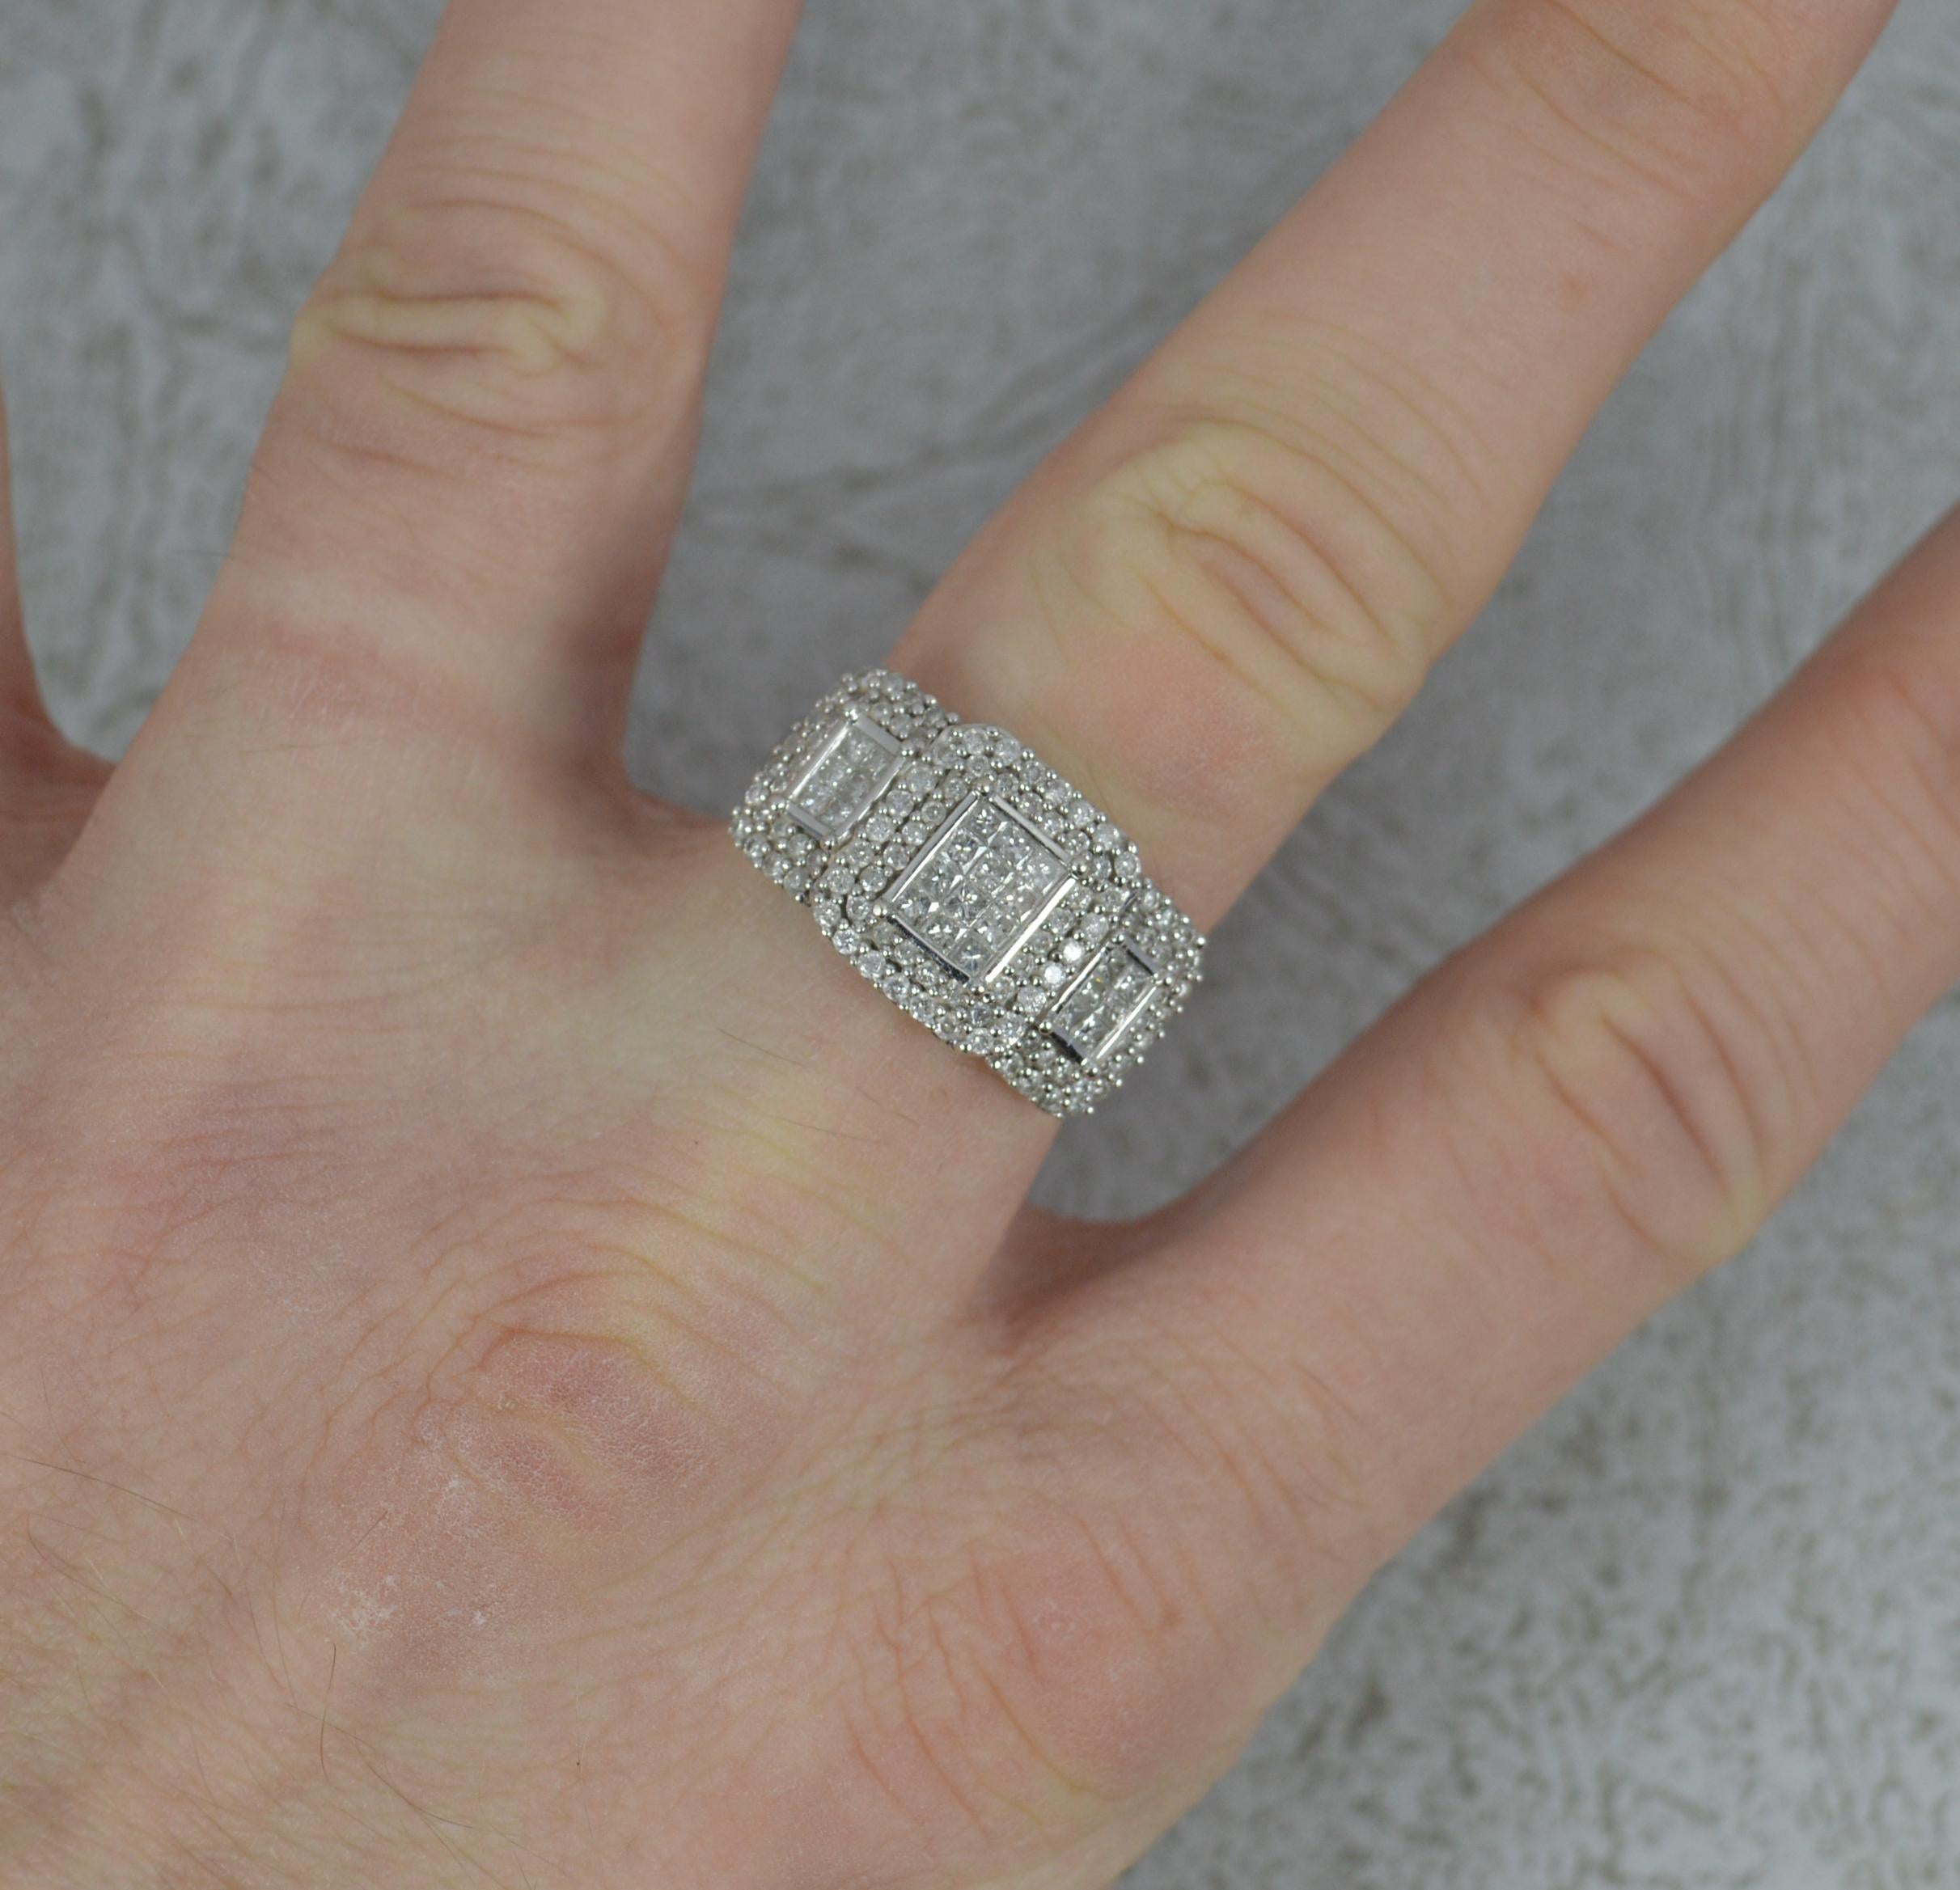 A stunning diamond cluster ring.
Solid and heavy 18 carat white gold example.
Designed with three clusters of princess cut diamonds with full borders of round brilliant cuts.
20mm x 12mm cluster head. Total weight of 1.00 carats as confirmed to the